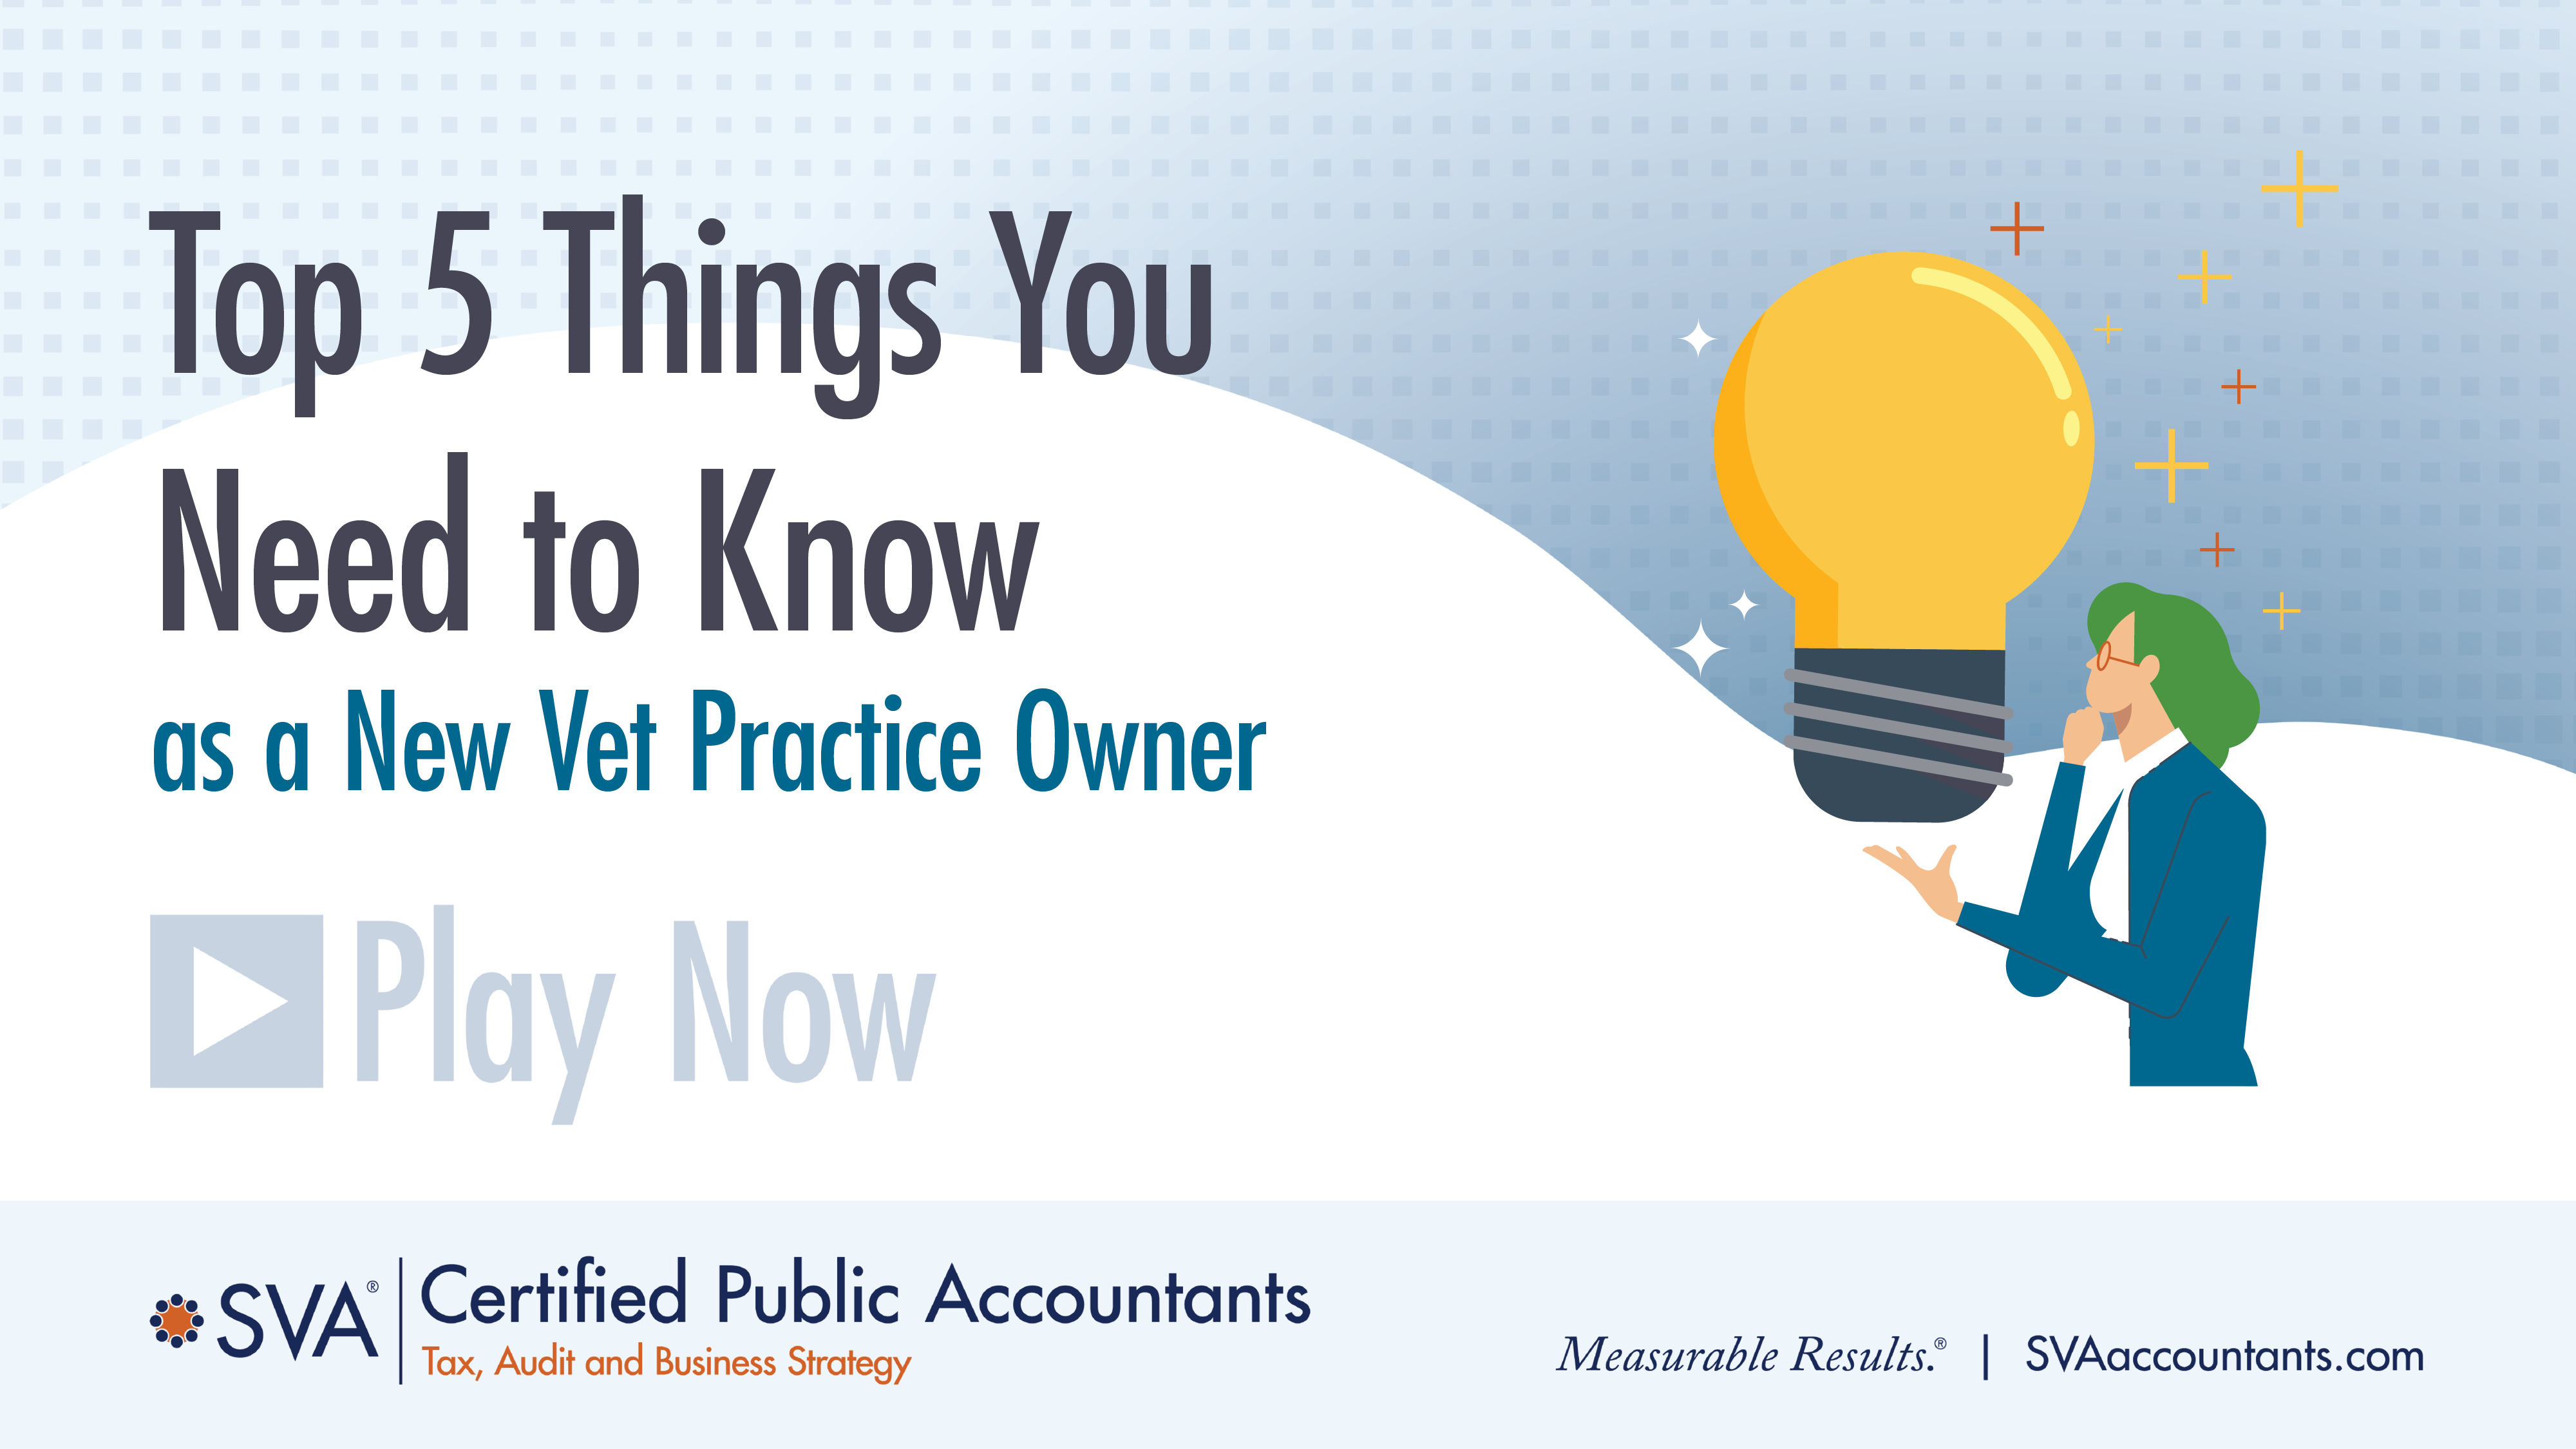 Top 5 Things You Need to Know as a New Vet Practice Owner